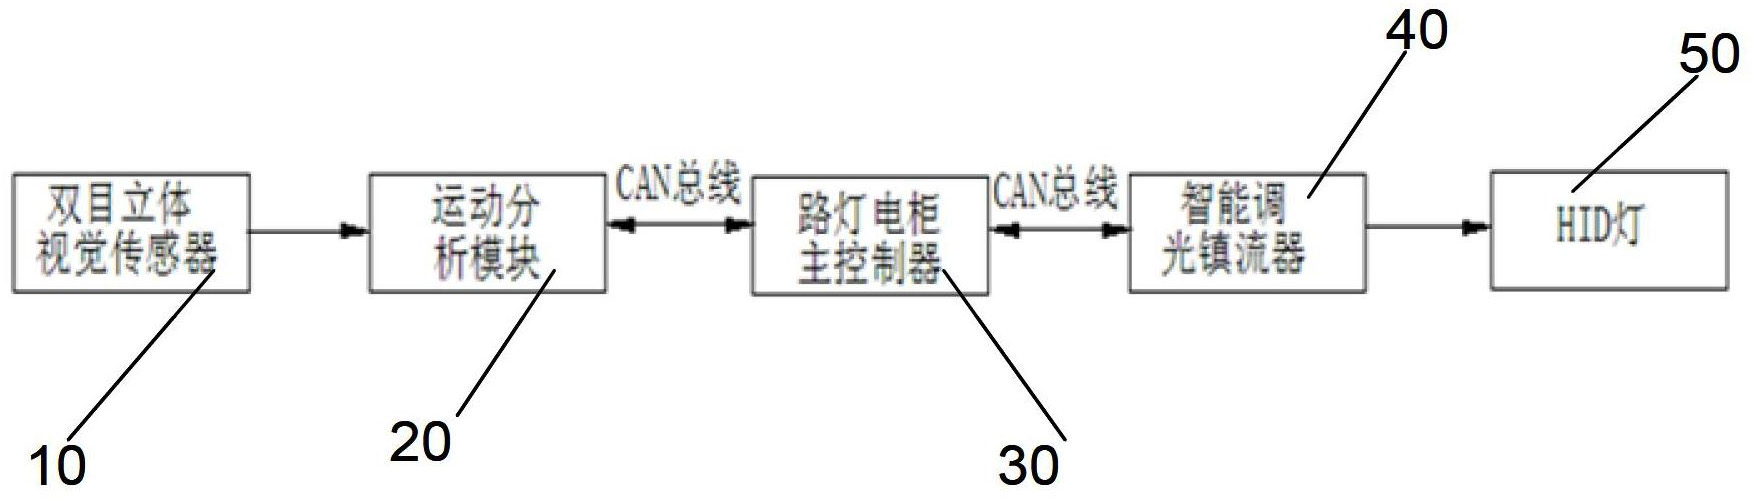 Image-recognition-type street lamp brightness prediction control and maintenance system